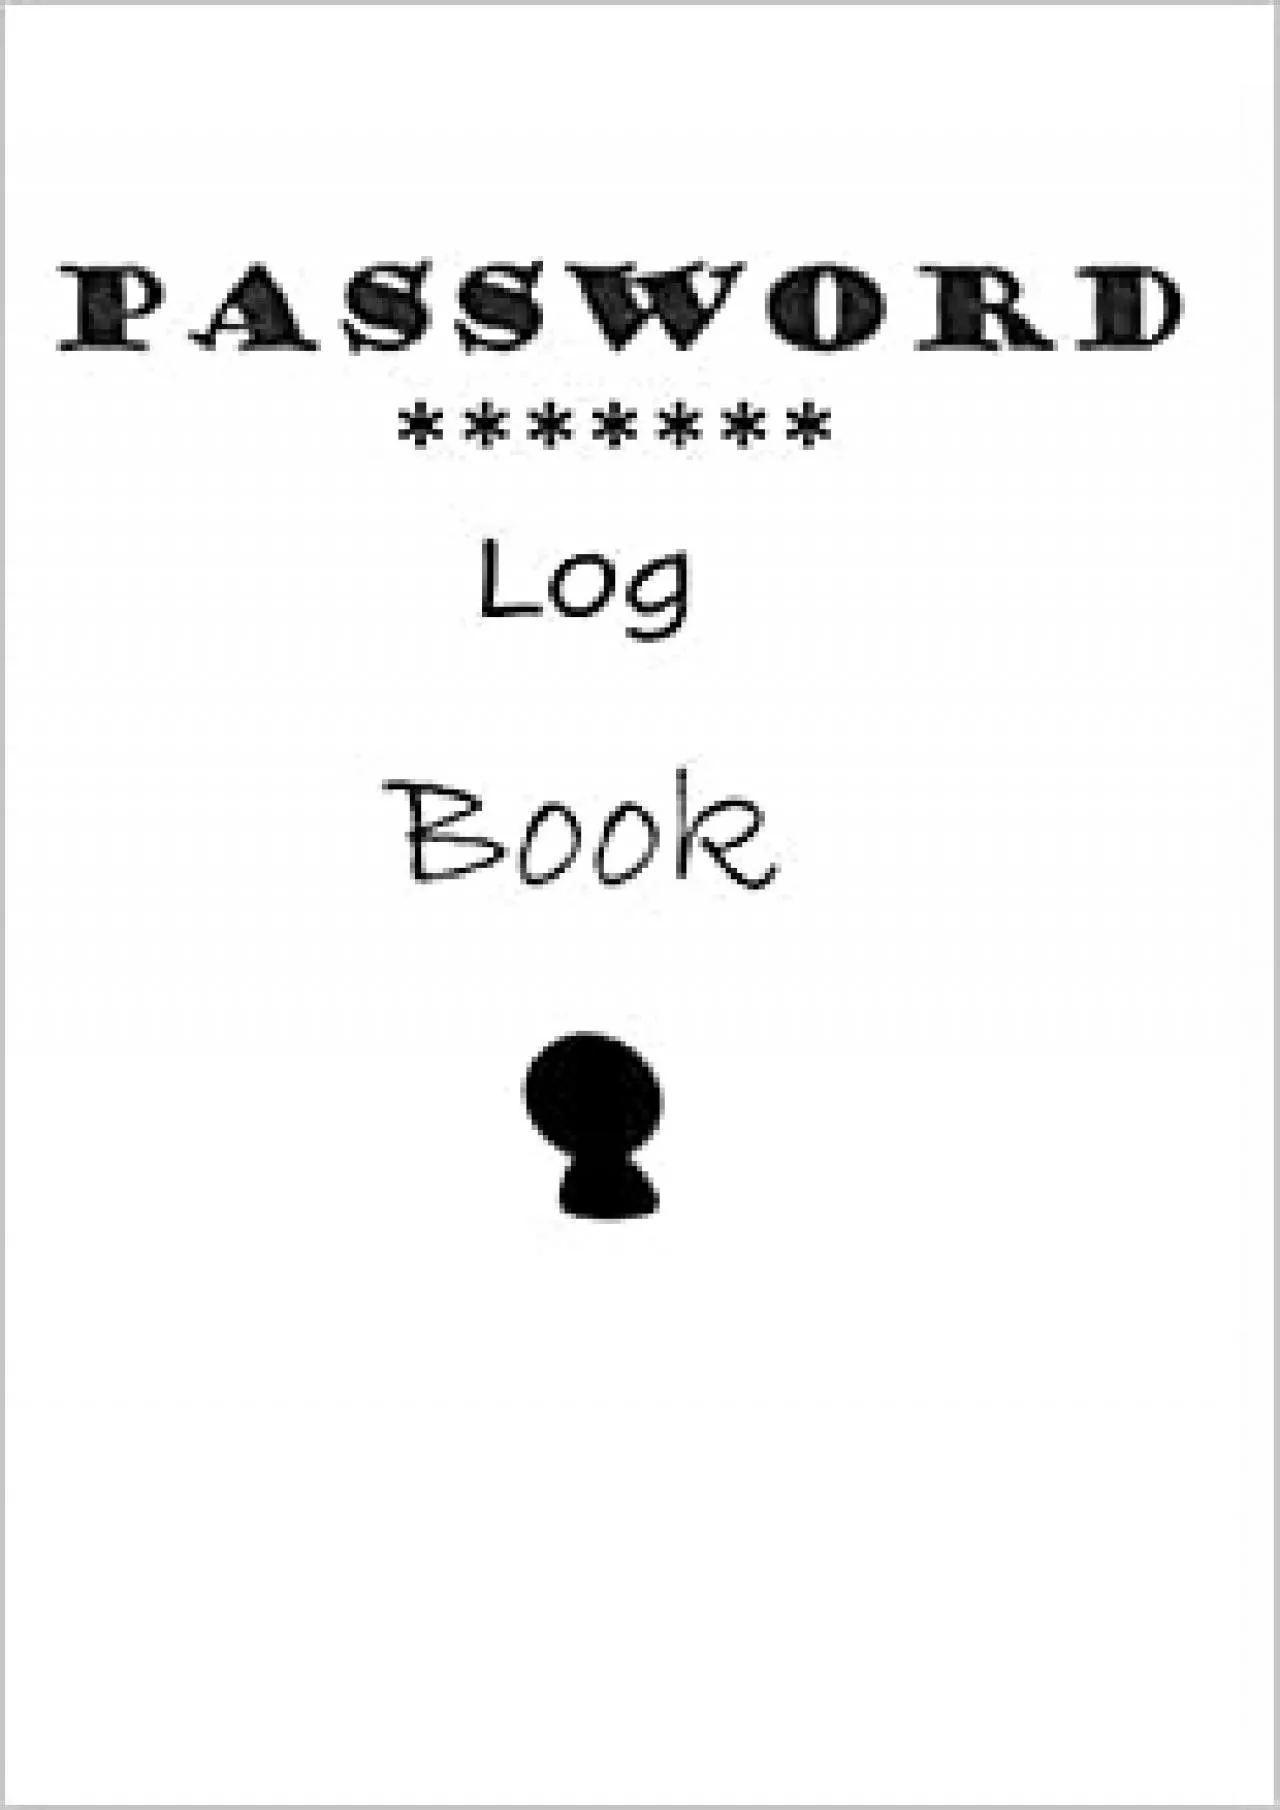 (BOOK)-Password Log Book: Password Log Book for Cyberspace or other related functions